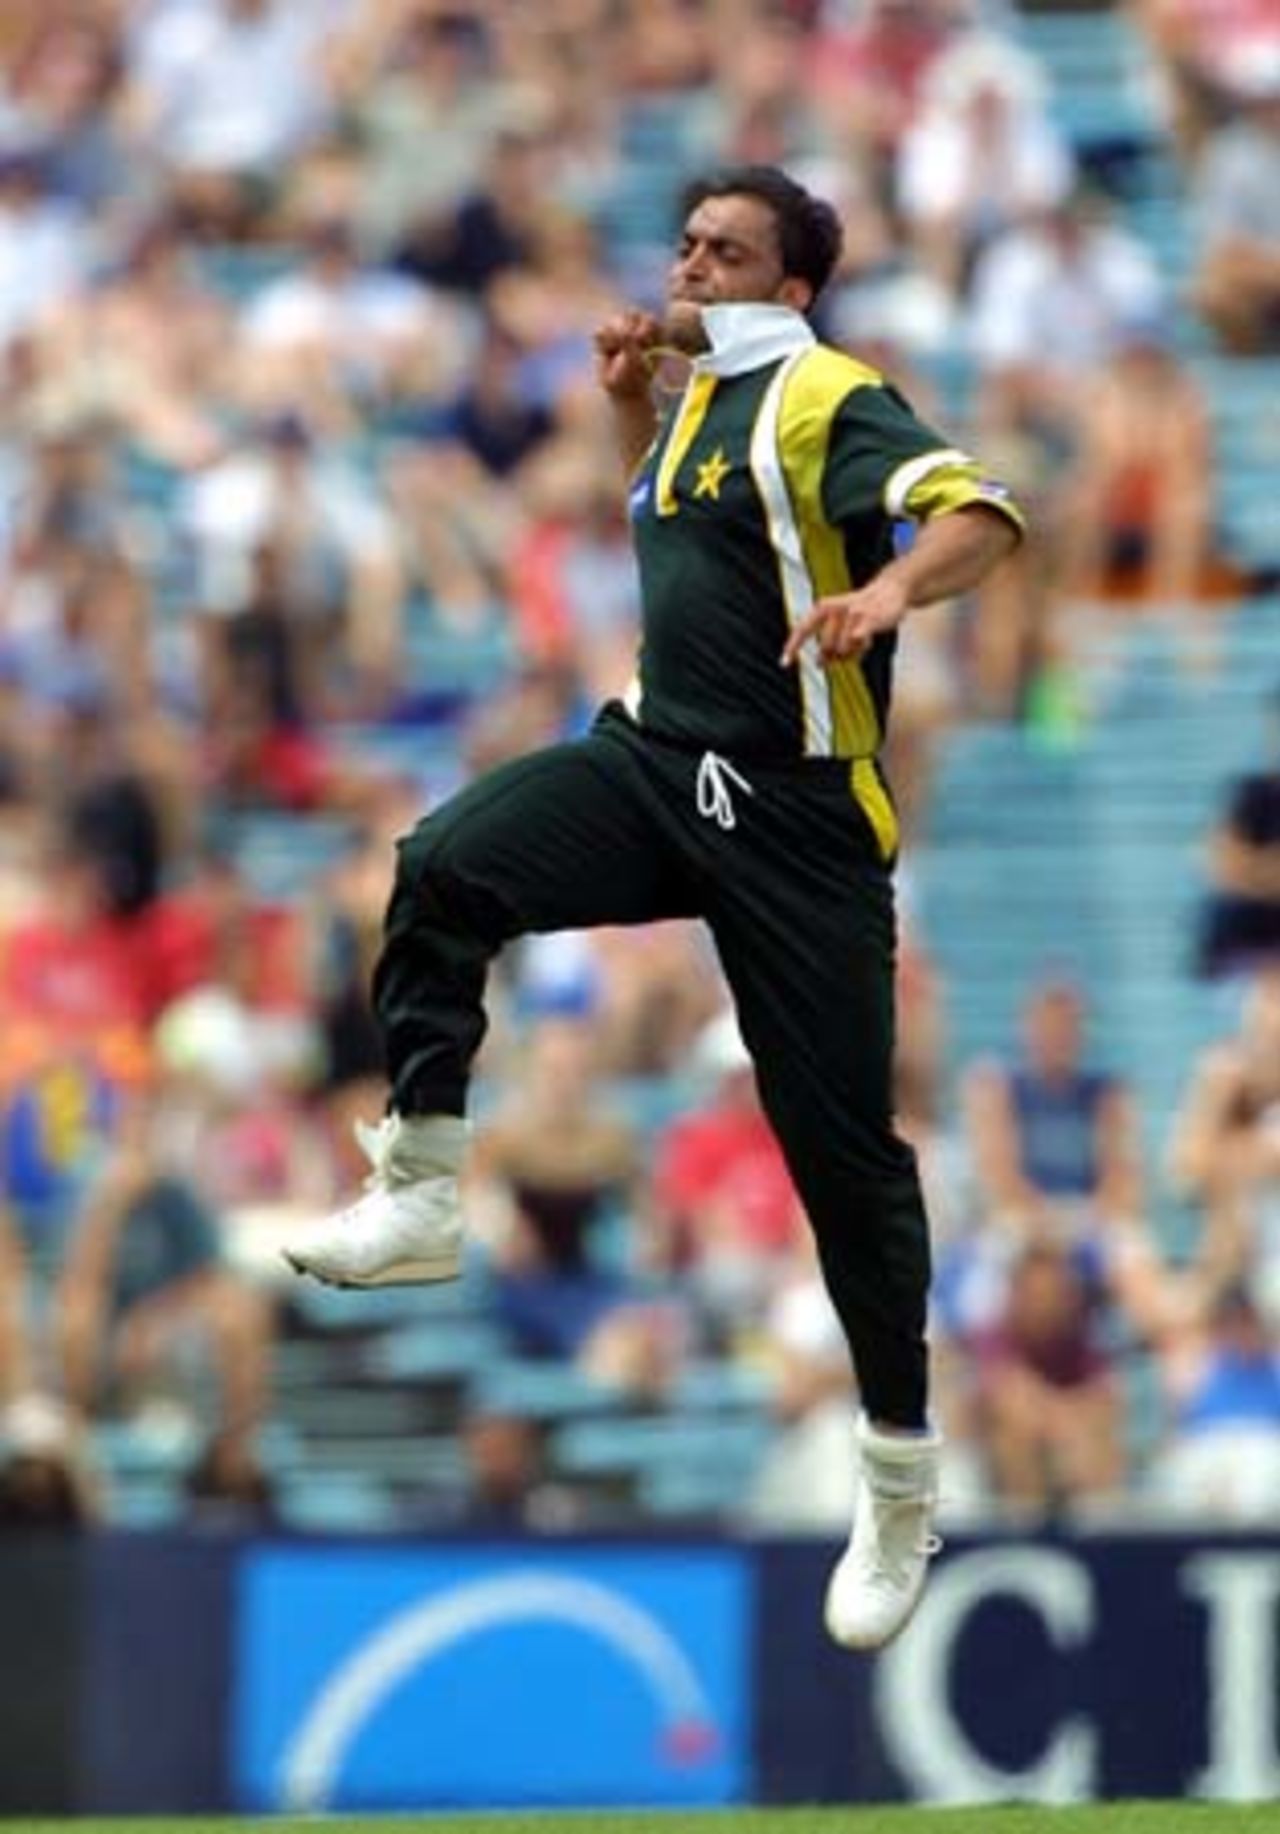 Pakistan fast bowler Shoaib Akhtar leaps in the air in celebration of bowling New Zealand lower order batsman Daniel Vettori for a golden duck. Vettori was Shoaib's third victim in a burst of five wickets for two runs in the space of 11 balls. Shoaib finished with figures of 5-19 from 6.3 overs, his first five-wicket bag in One-Day Internationals. 1st One-Day International: New Zealand v Pakistan at Eden Park, Auckland, 18 February 2001.